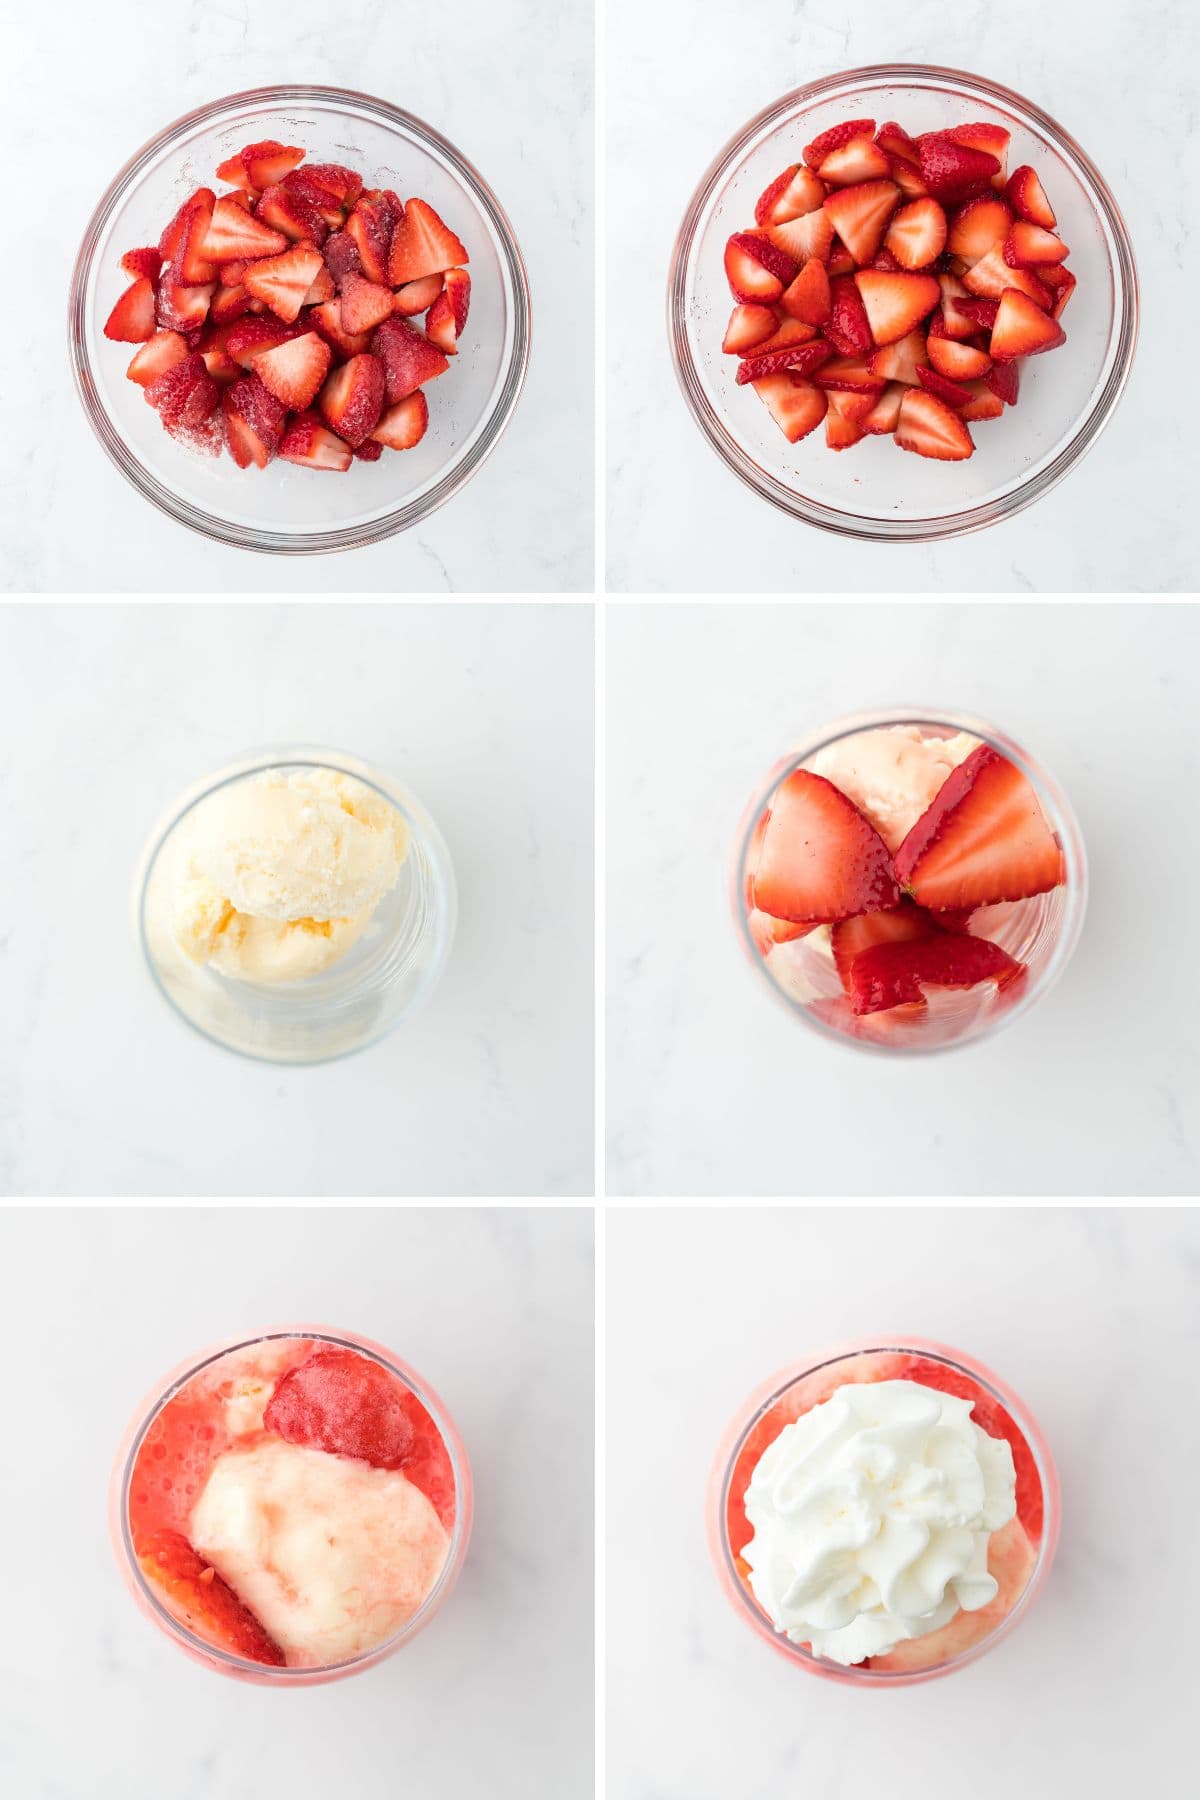 A collage of images showing the steps for making a strawberry float.